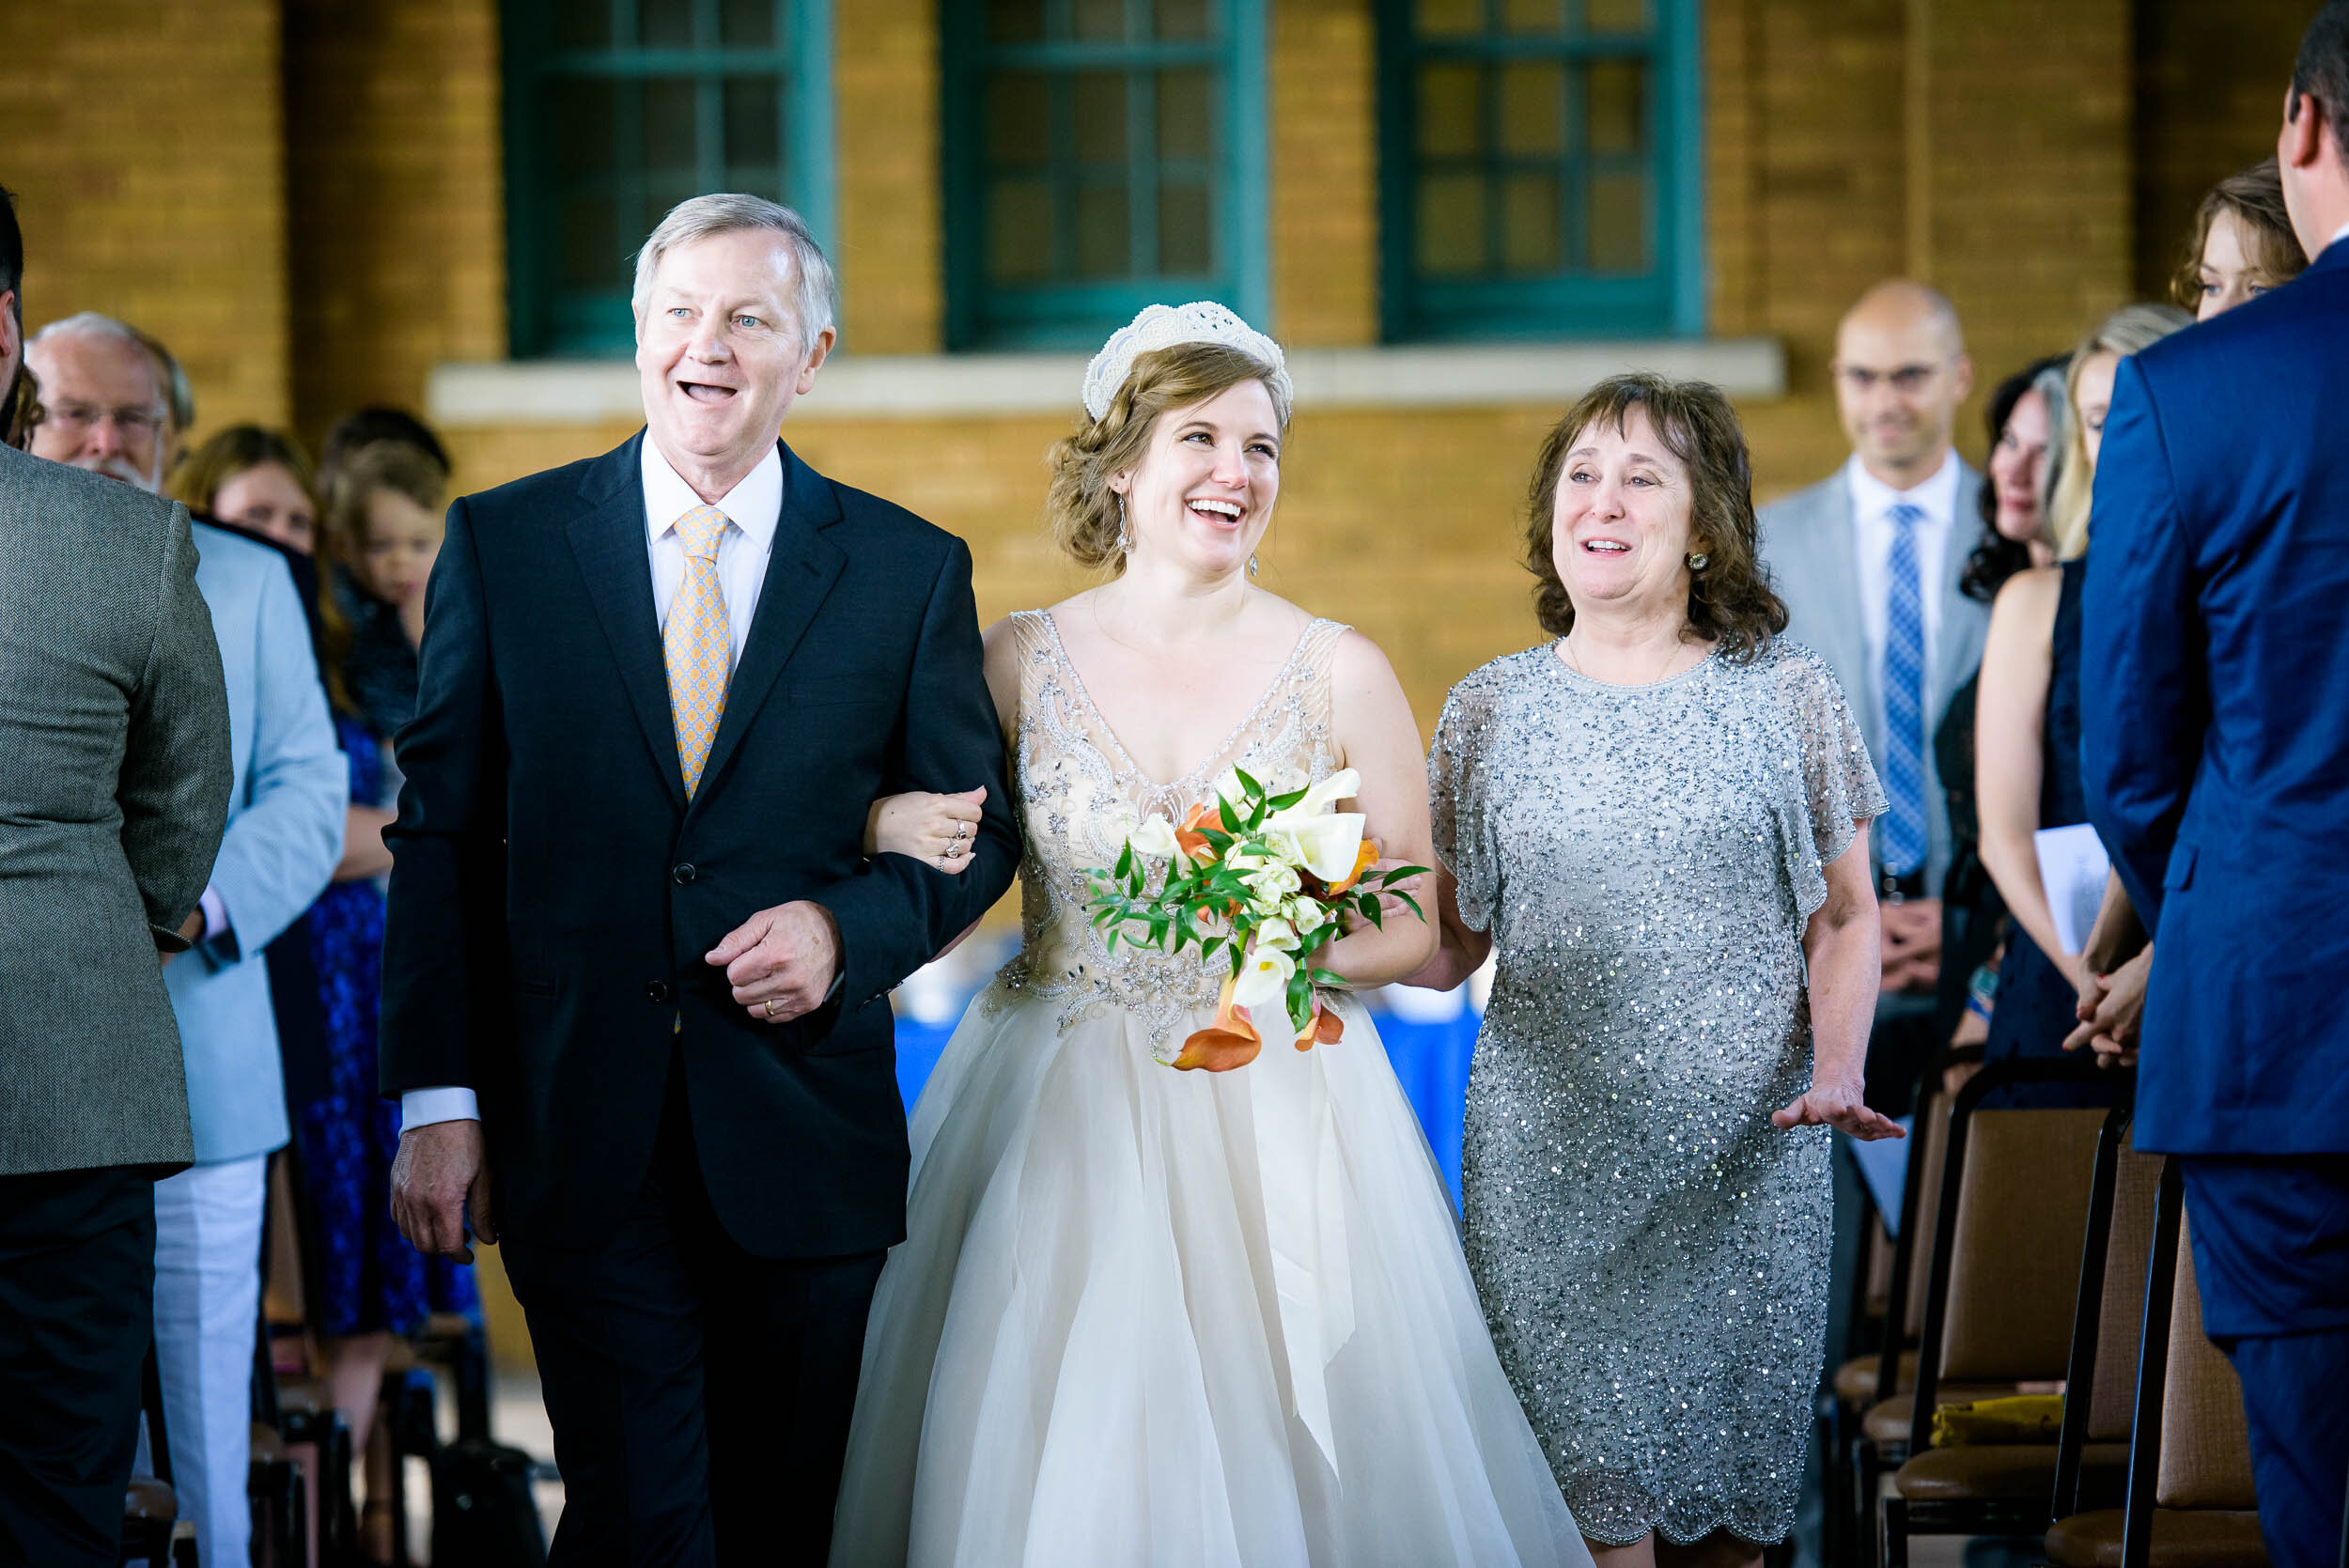 Bride and parents walk down the aisle: Columbus Park Refectory Chicago wedding captured by J. Brown Photography.